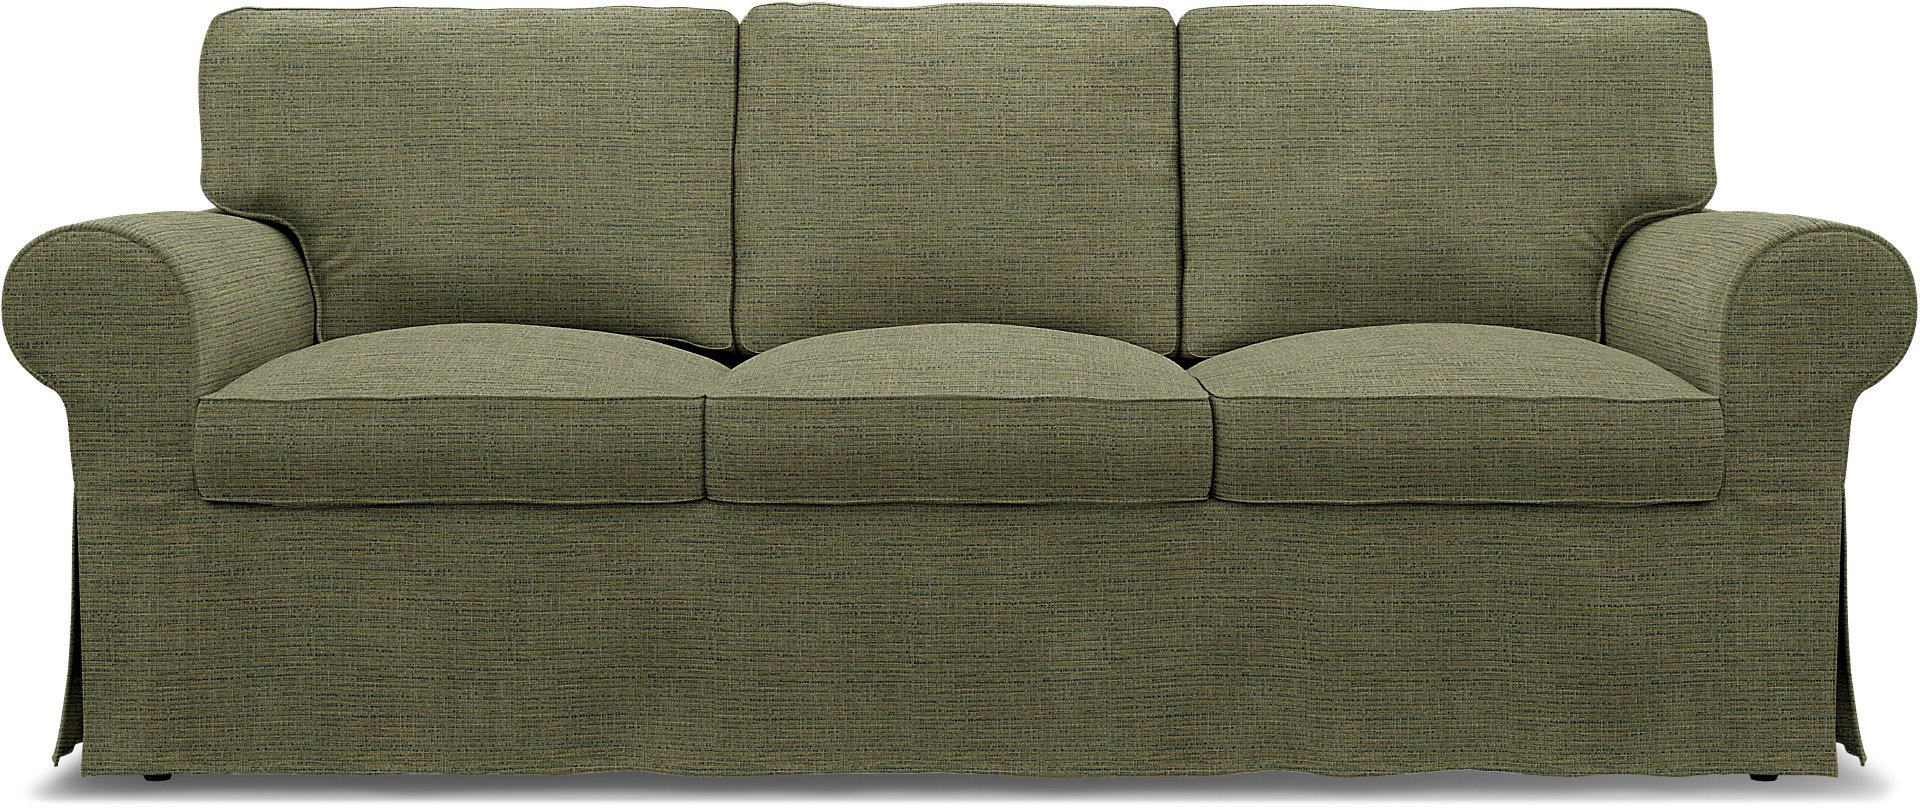 IKEA - Ektorp 3 Seater Sofa Bed Cover, Meadow Green, Boucle & Texture - Bemz